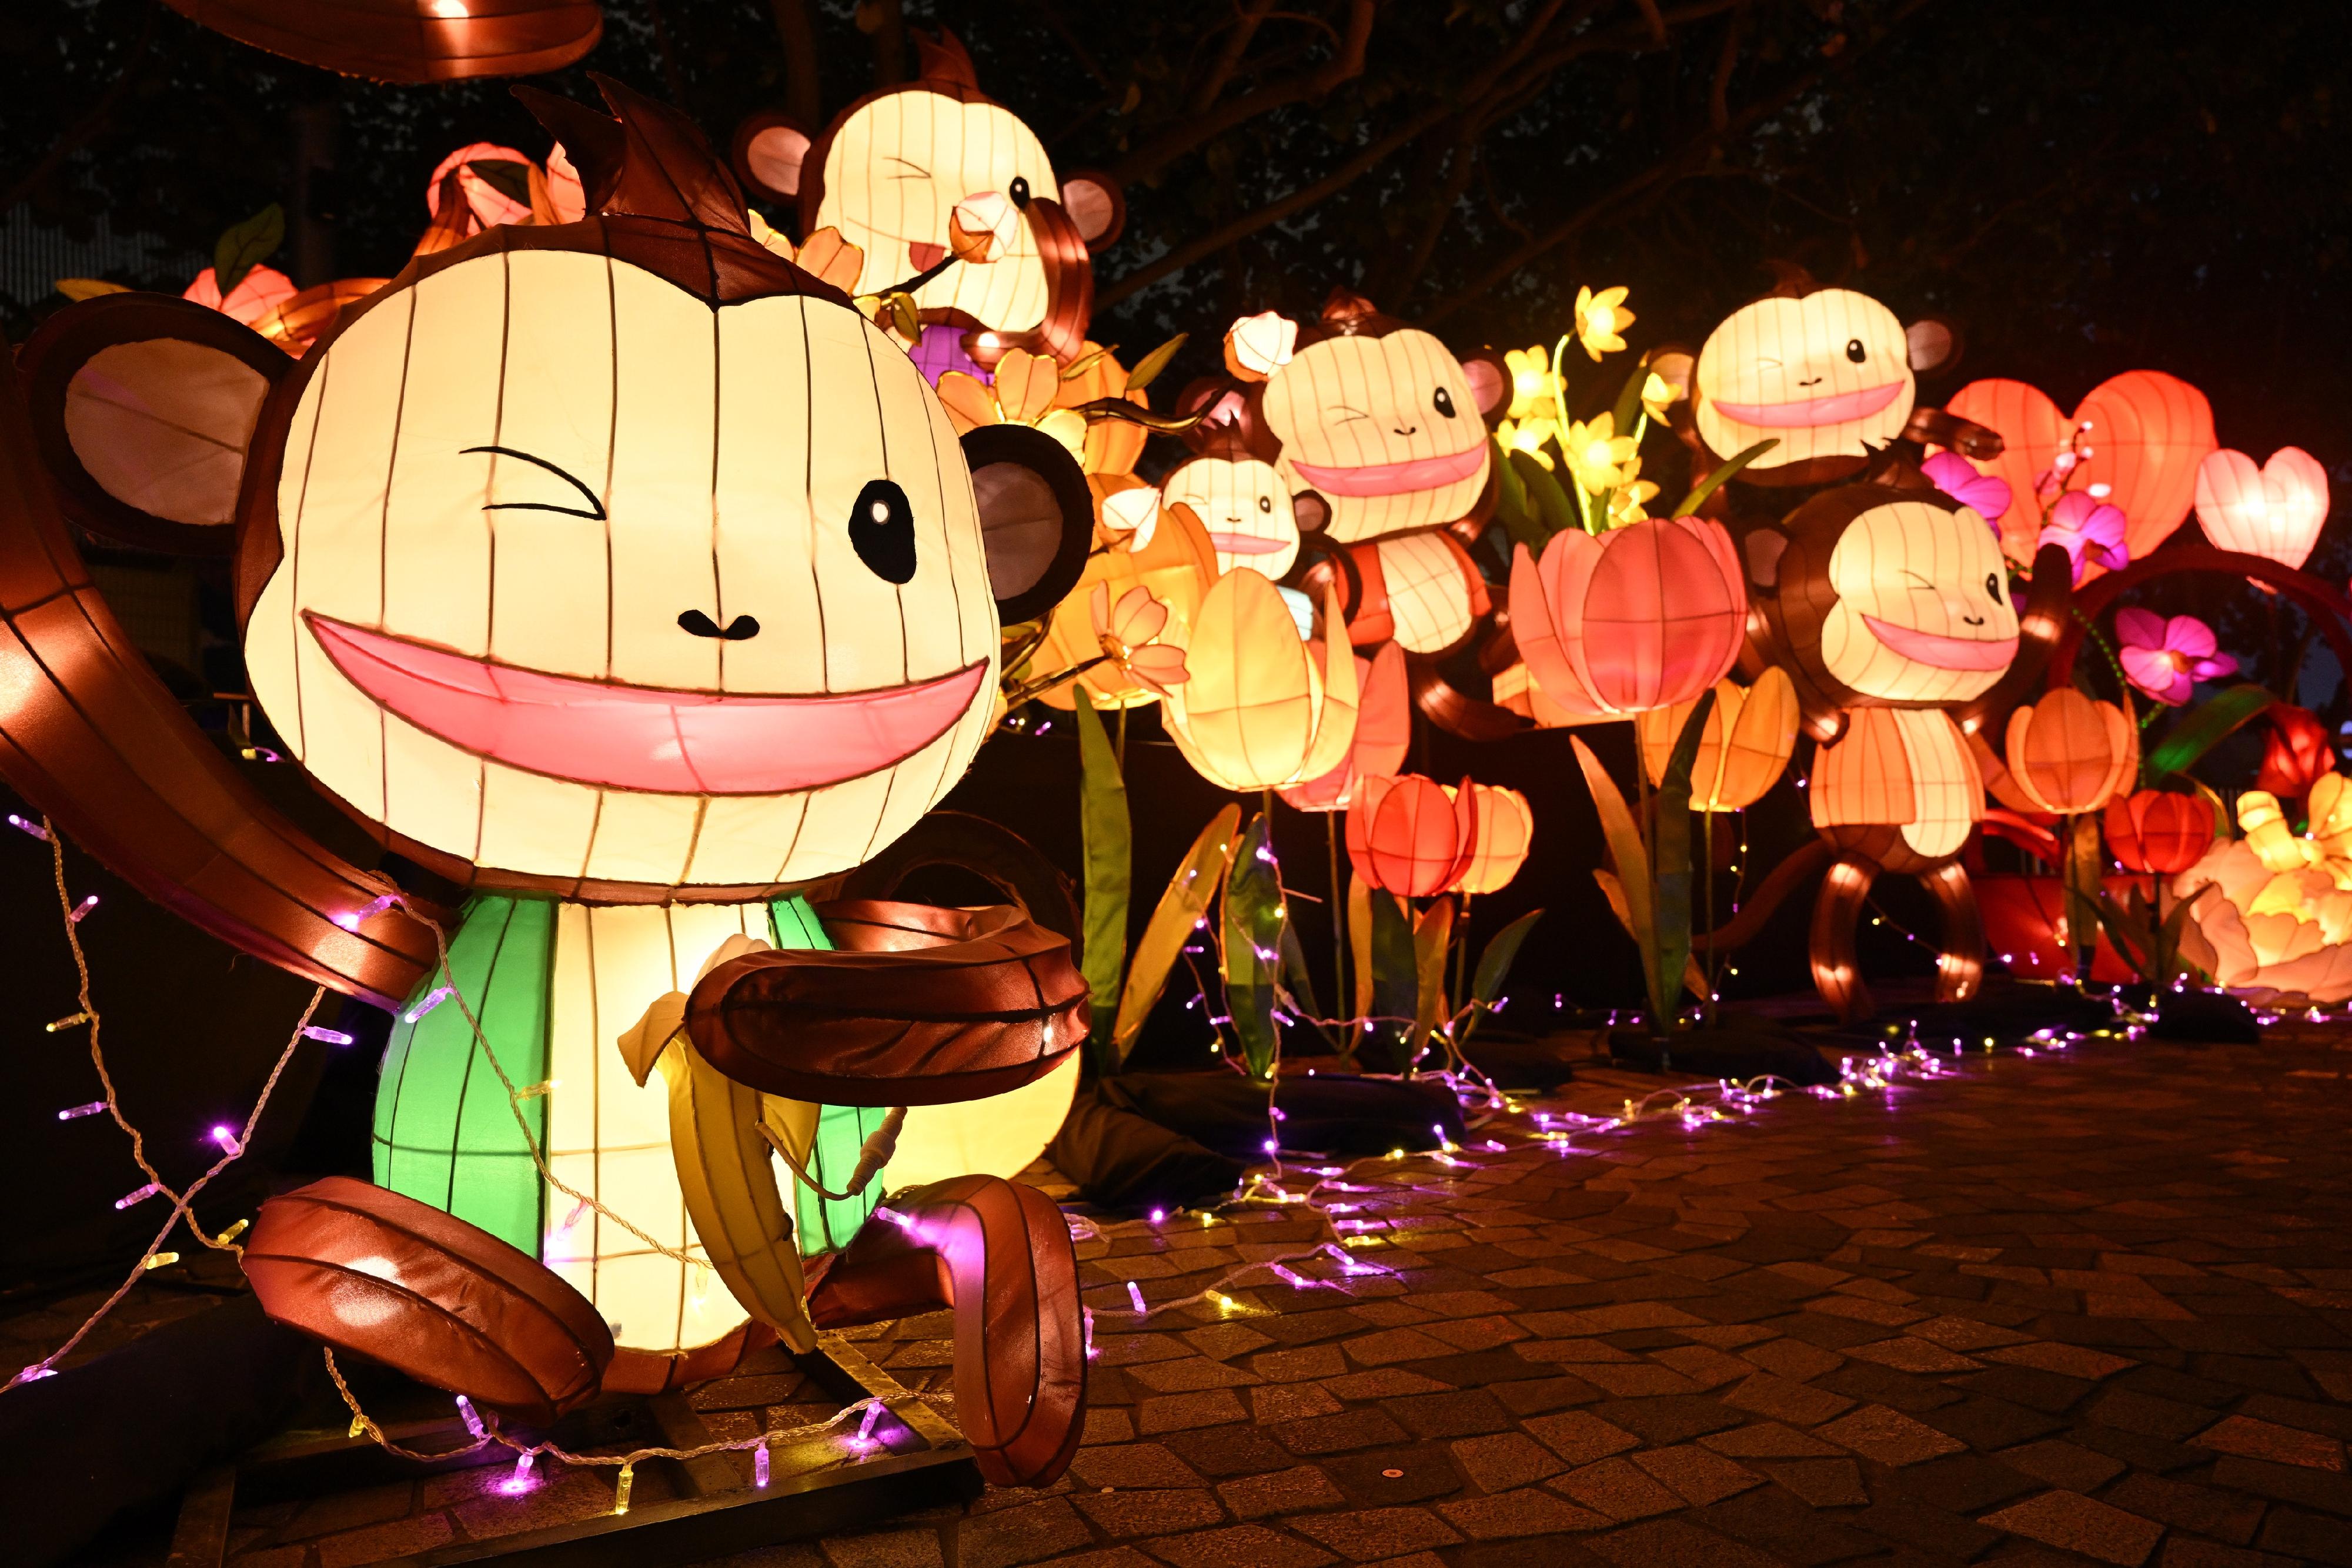 To celebrate the festive season with the public, the Leisure and Cultural Services Department is presenting the Lunar New Year Lantern Carnivals at the Hong Kong Cultural Centre Piazza, Hong Kong Velodrome Park, Tin Shui Wai Park and Ginza Square from today (February 20) until February 25. Picture shows colourful lanterns at the Hong Kong Cultural Centre Piazza.